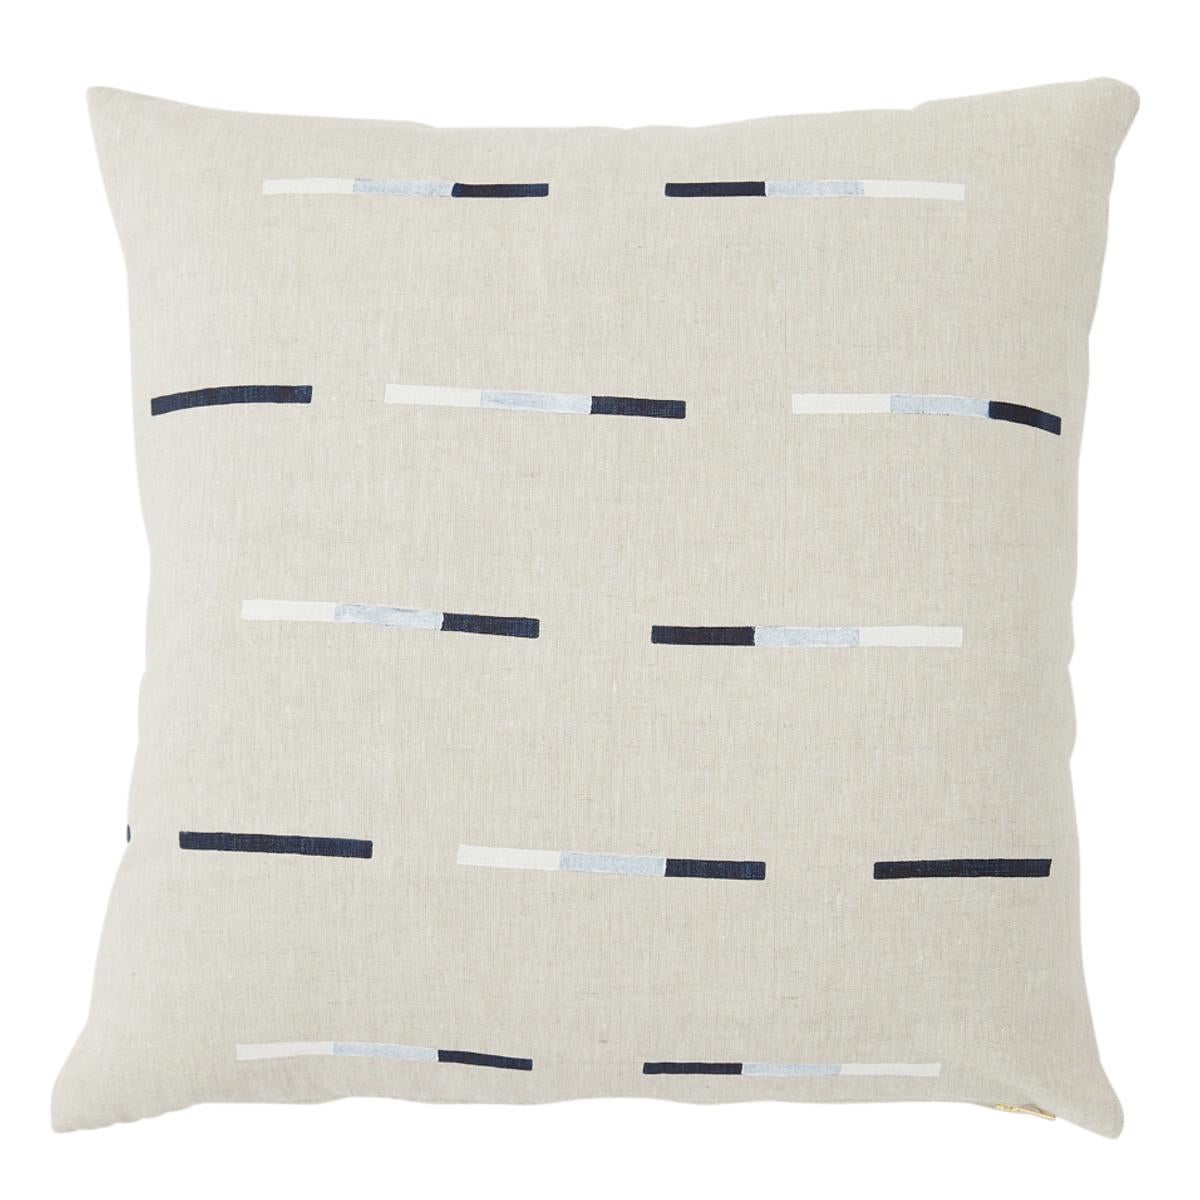 Overlapping Dashes Pillow 22"   For Sale